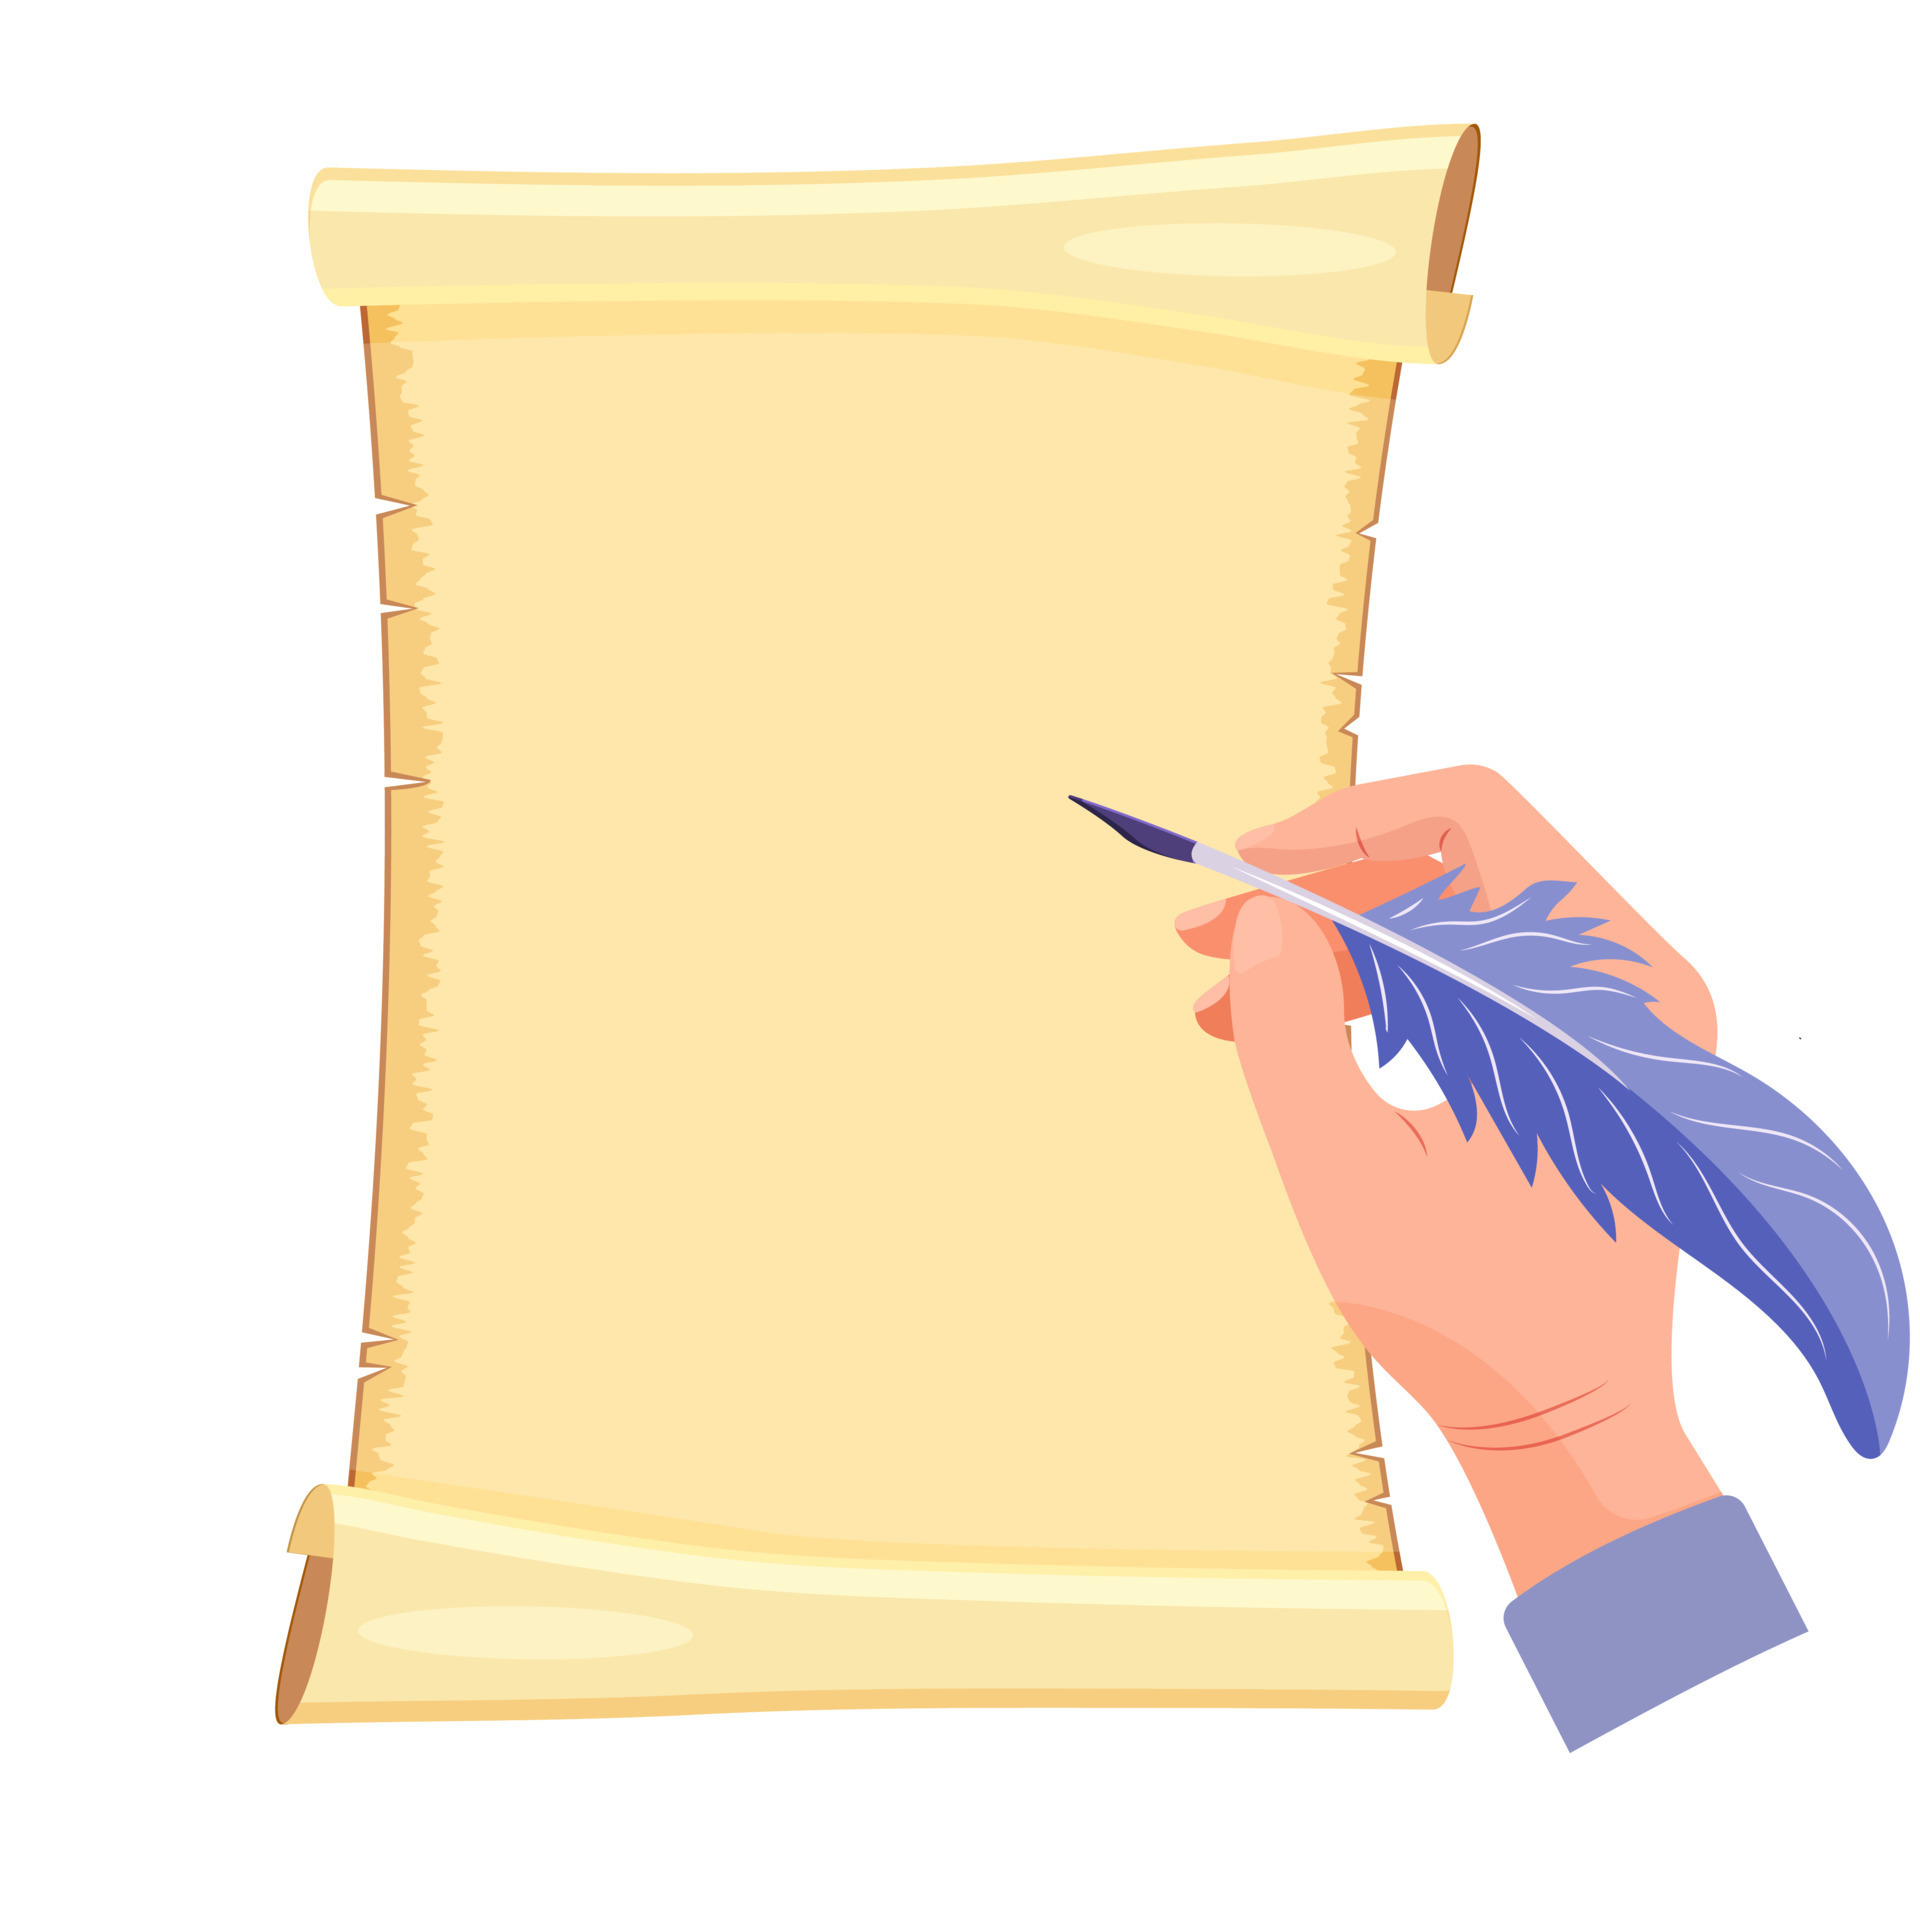 Scroll paper blank for text. Hand with an ink pen is writing on an